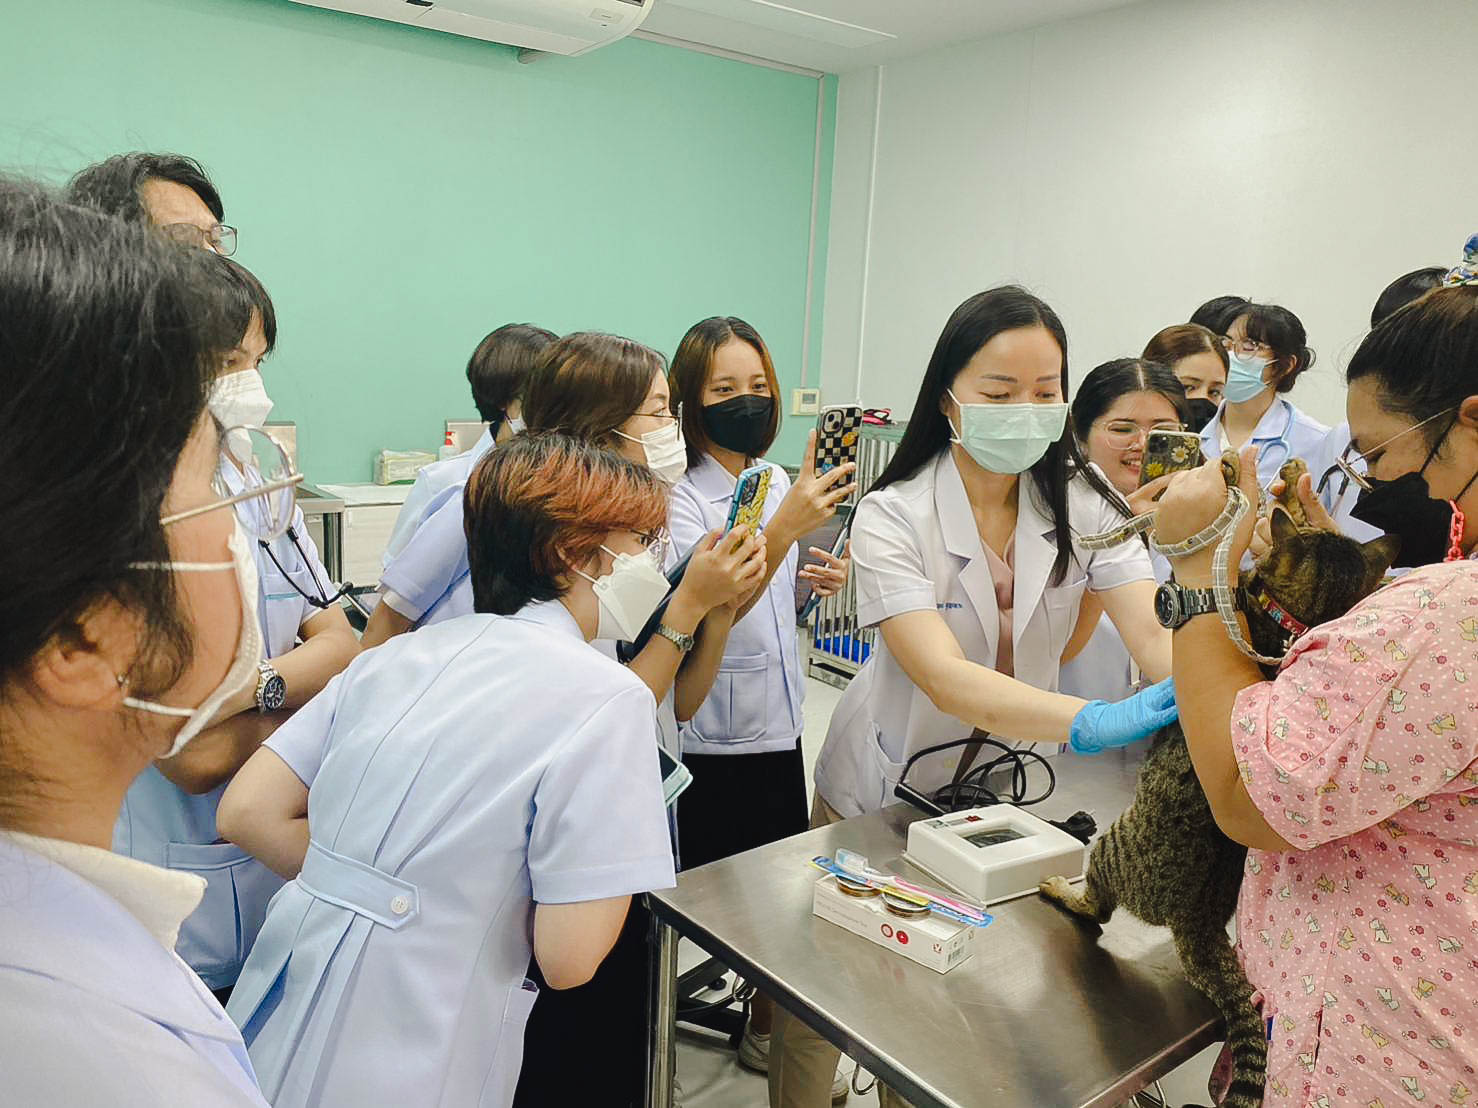 Veterinary students learn to examine the skin of small animals